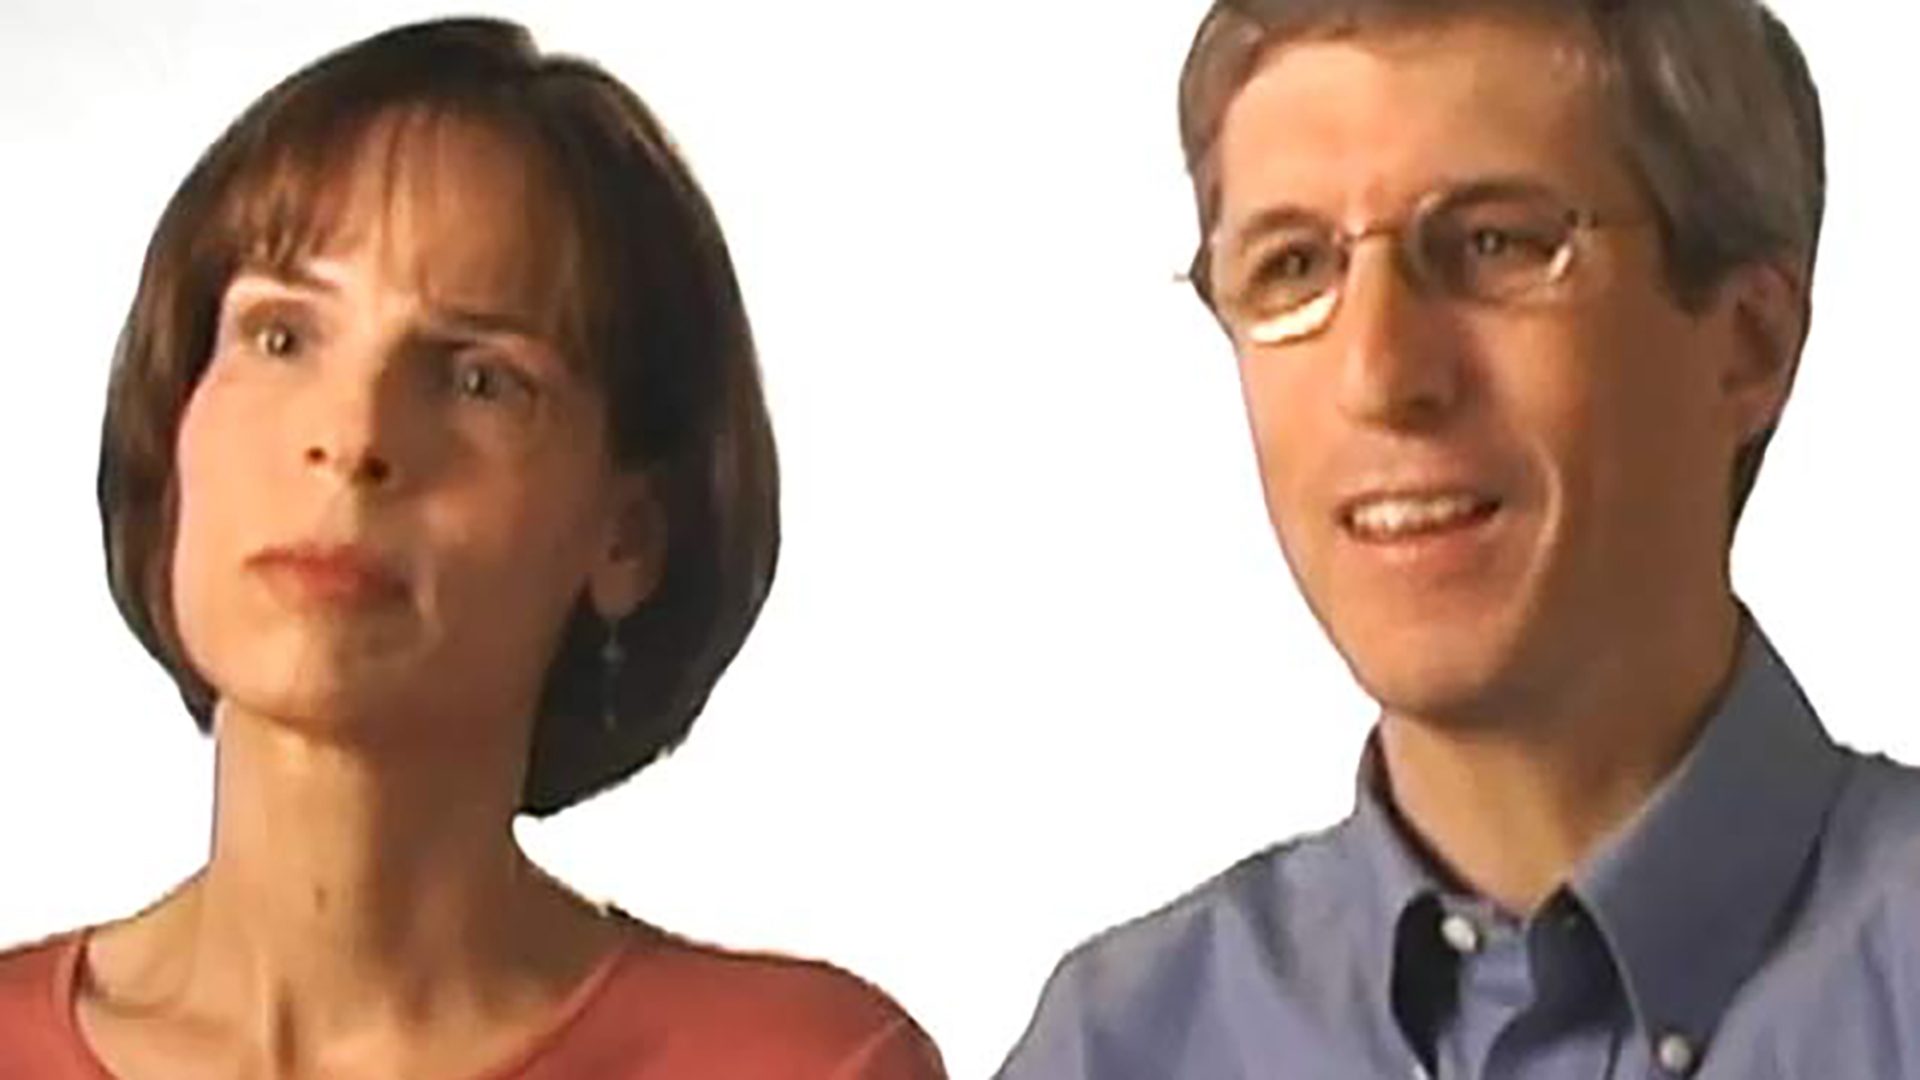 A middle-aged woman and man are interviewed against a white background